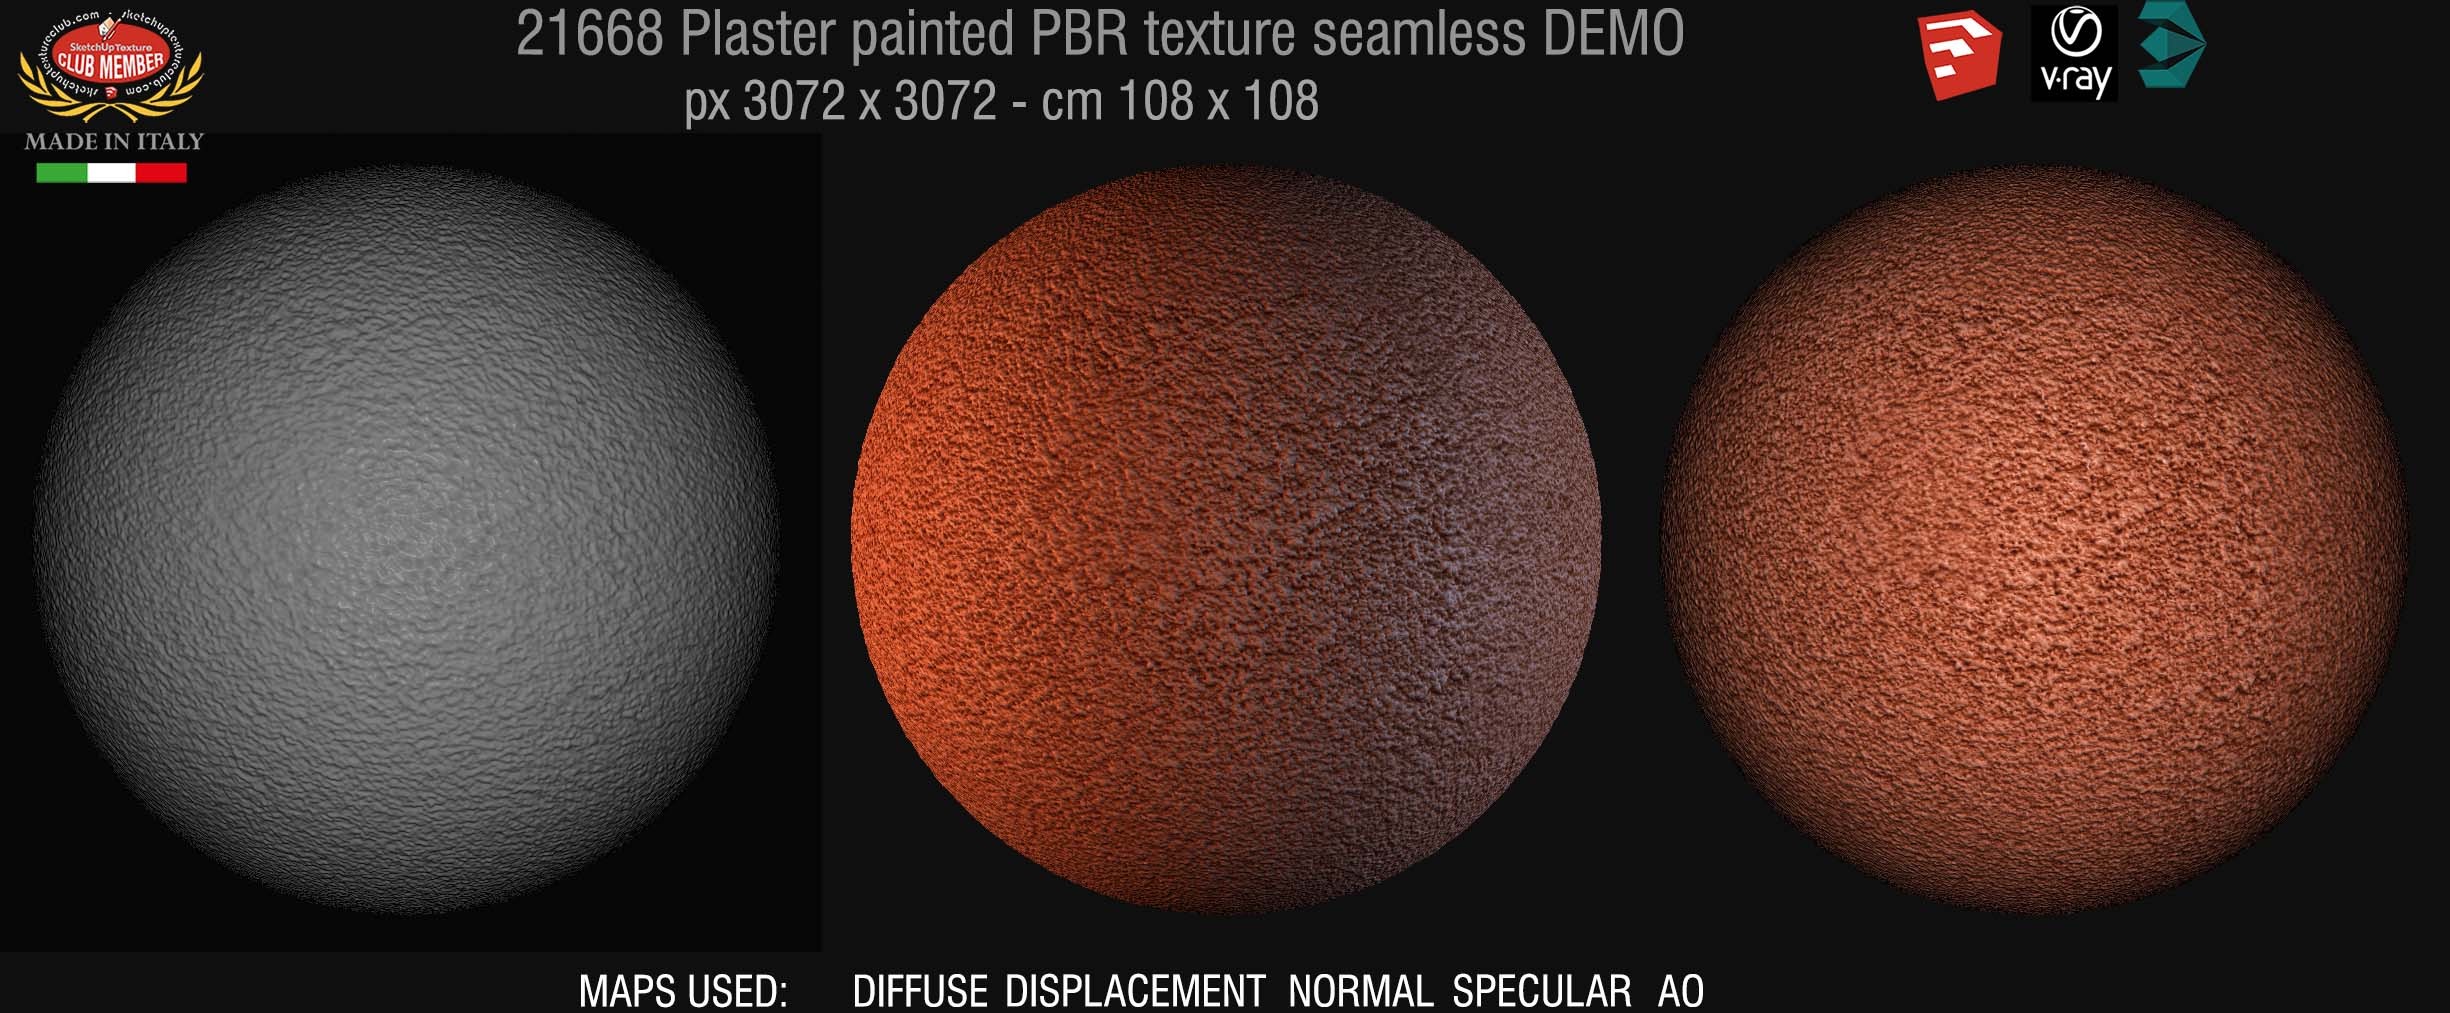 21668 plaster painted PBR texture seamless DEMO